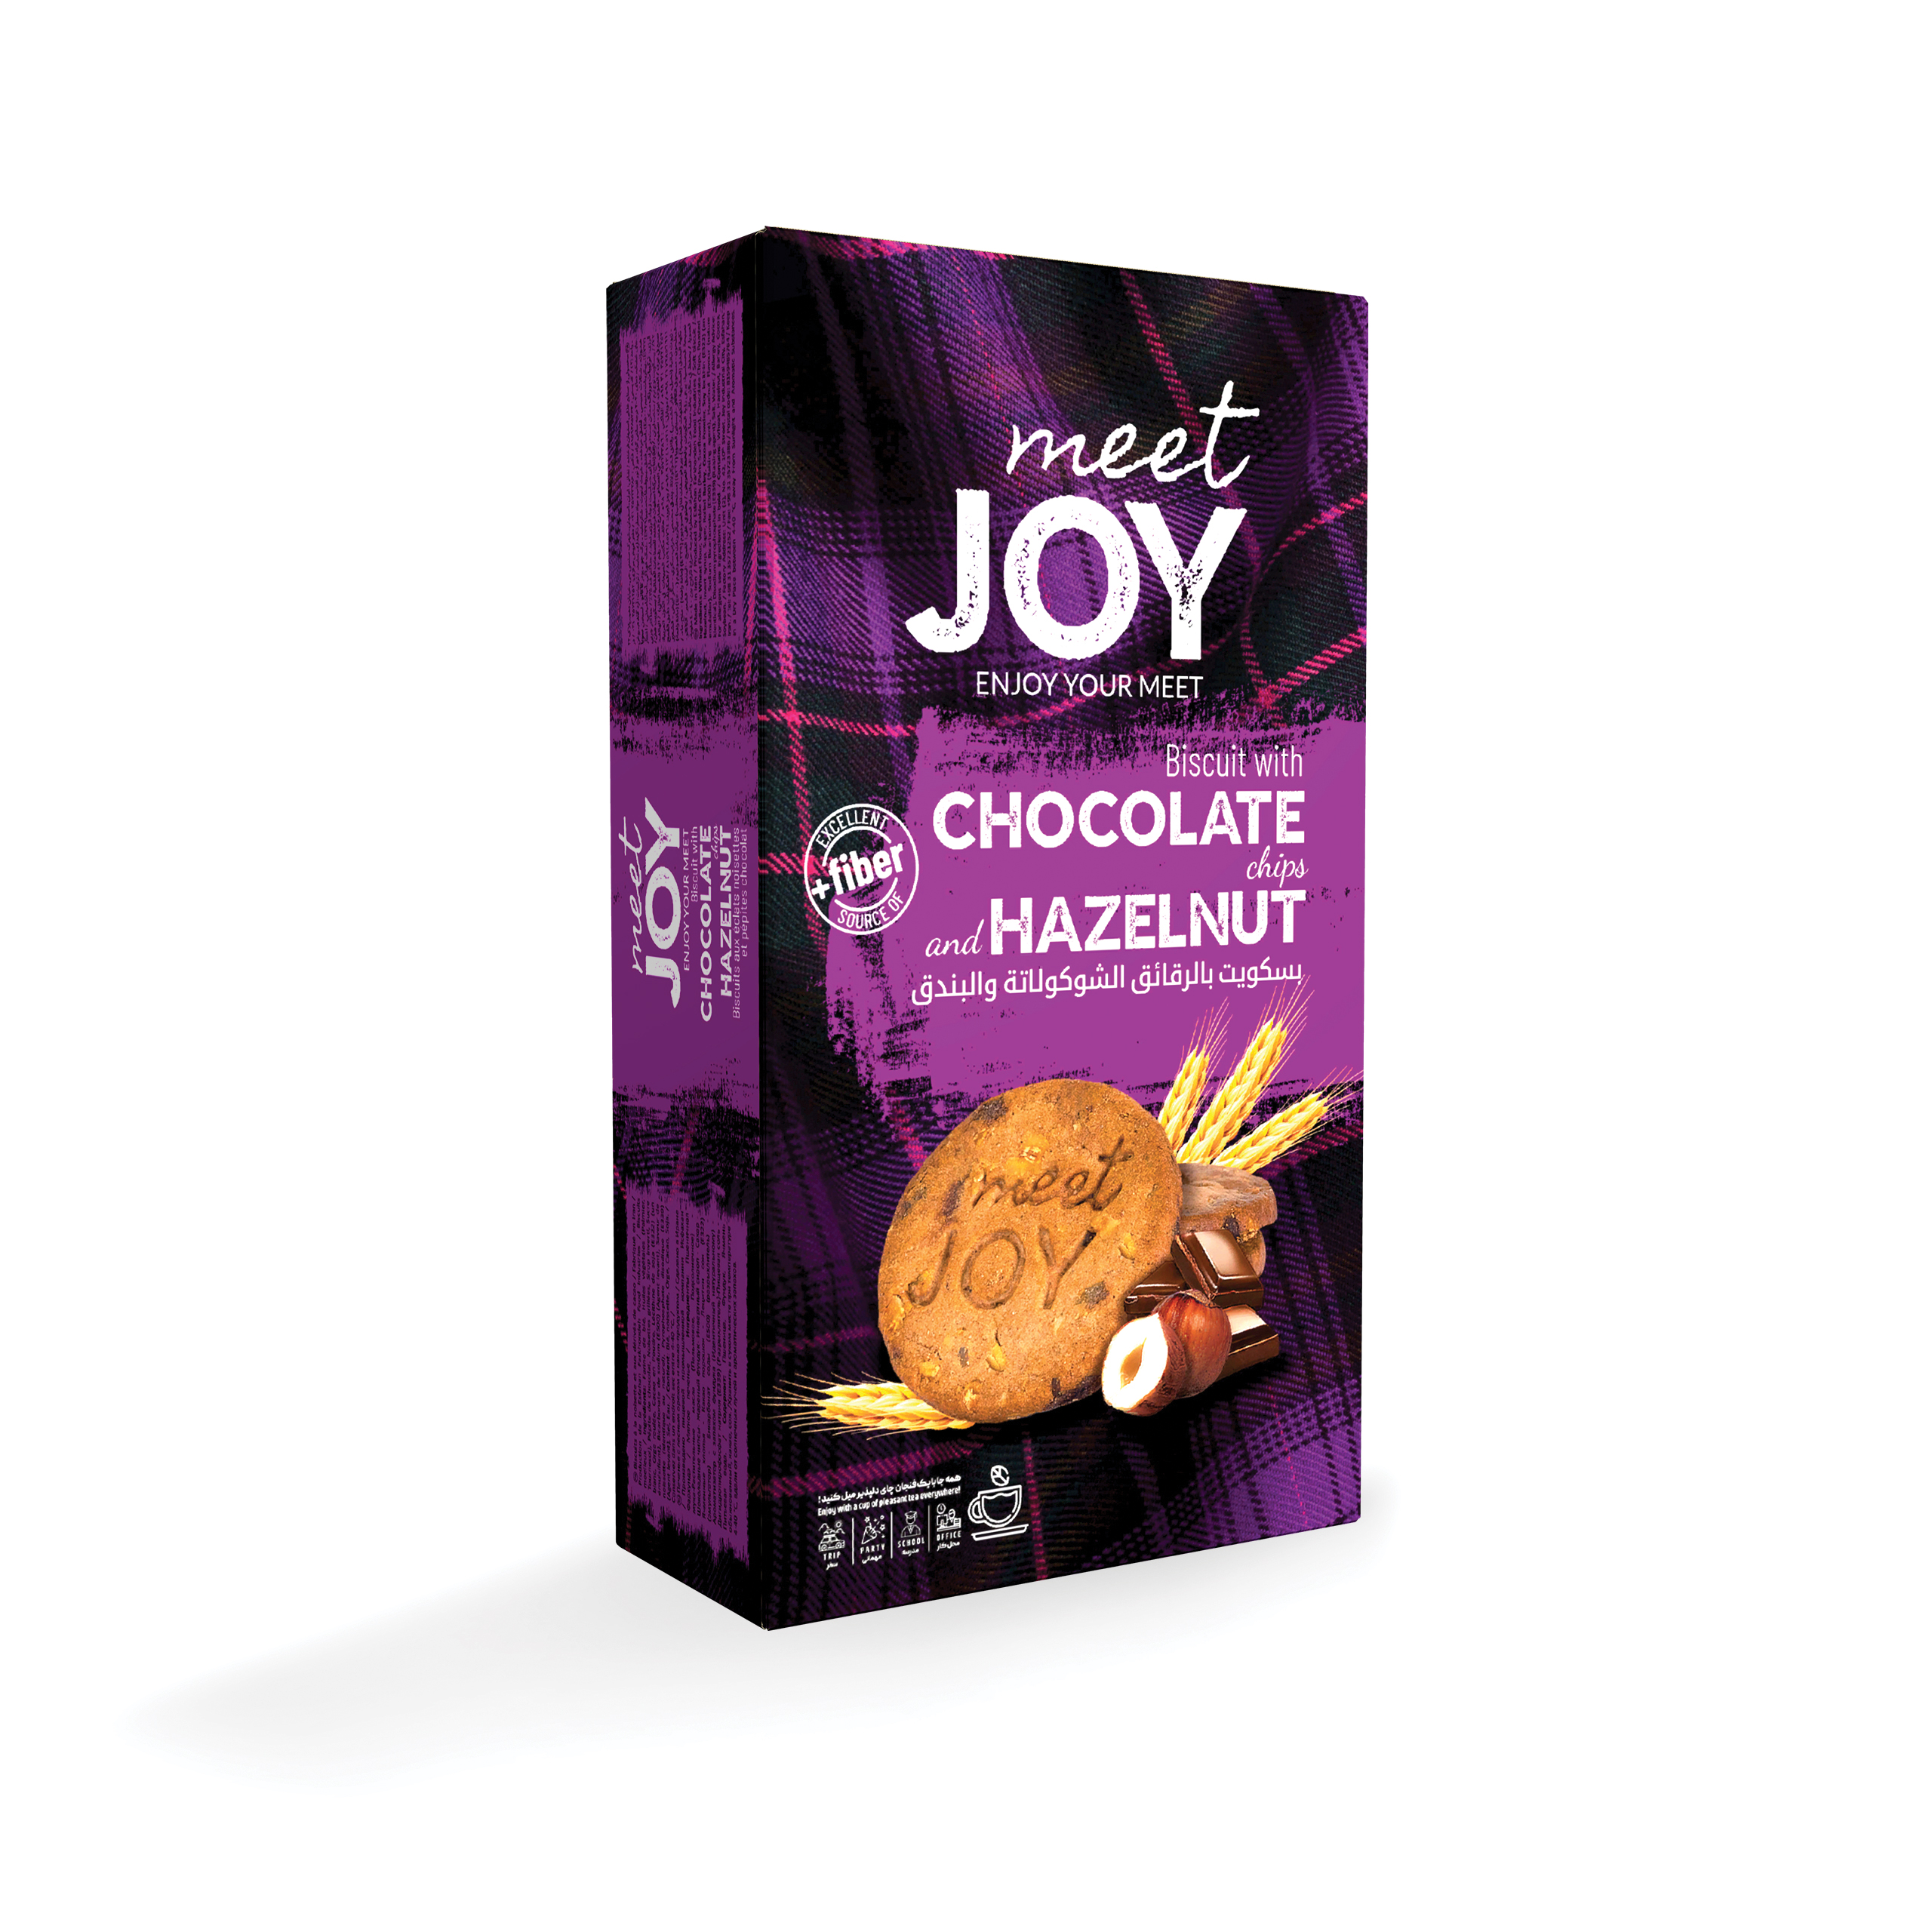 Joy Biscuit with Chocolate chips and hazelnut - Meet Joy